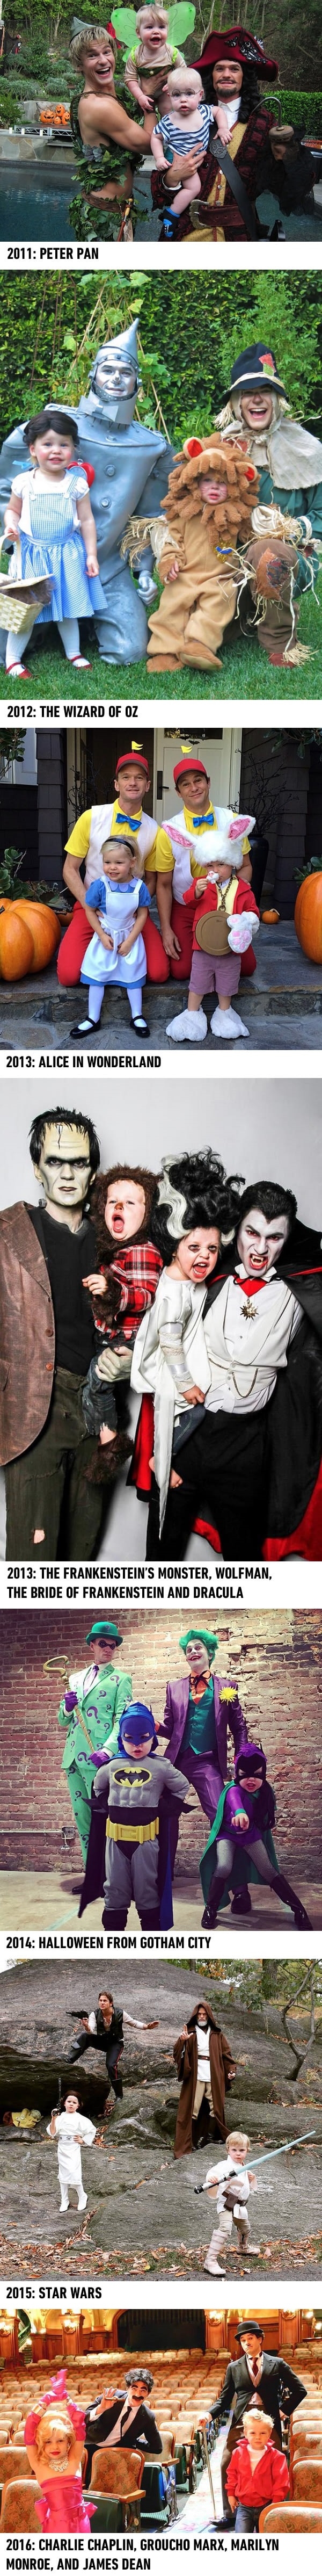 Neil Patrick Harris and family give us serious costume goals